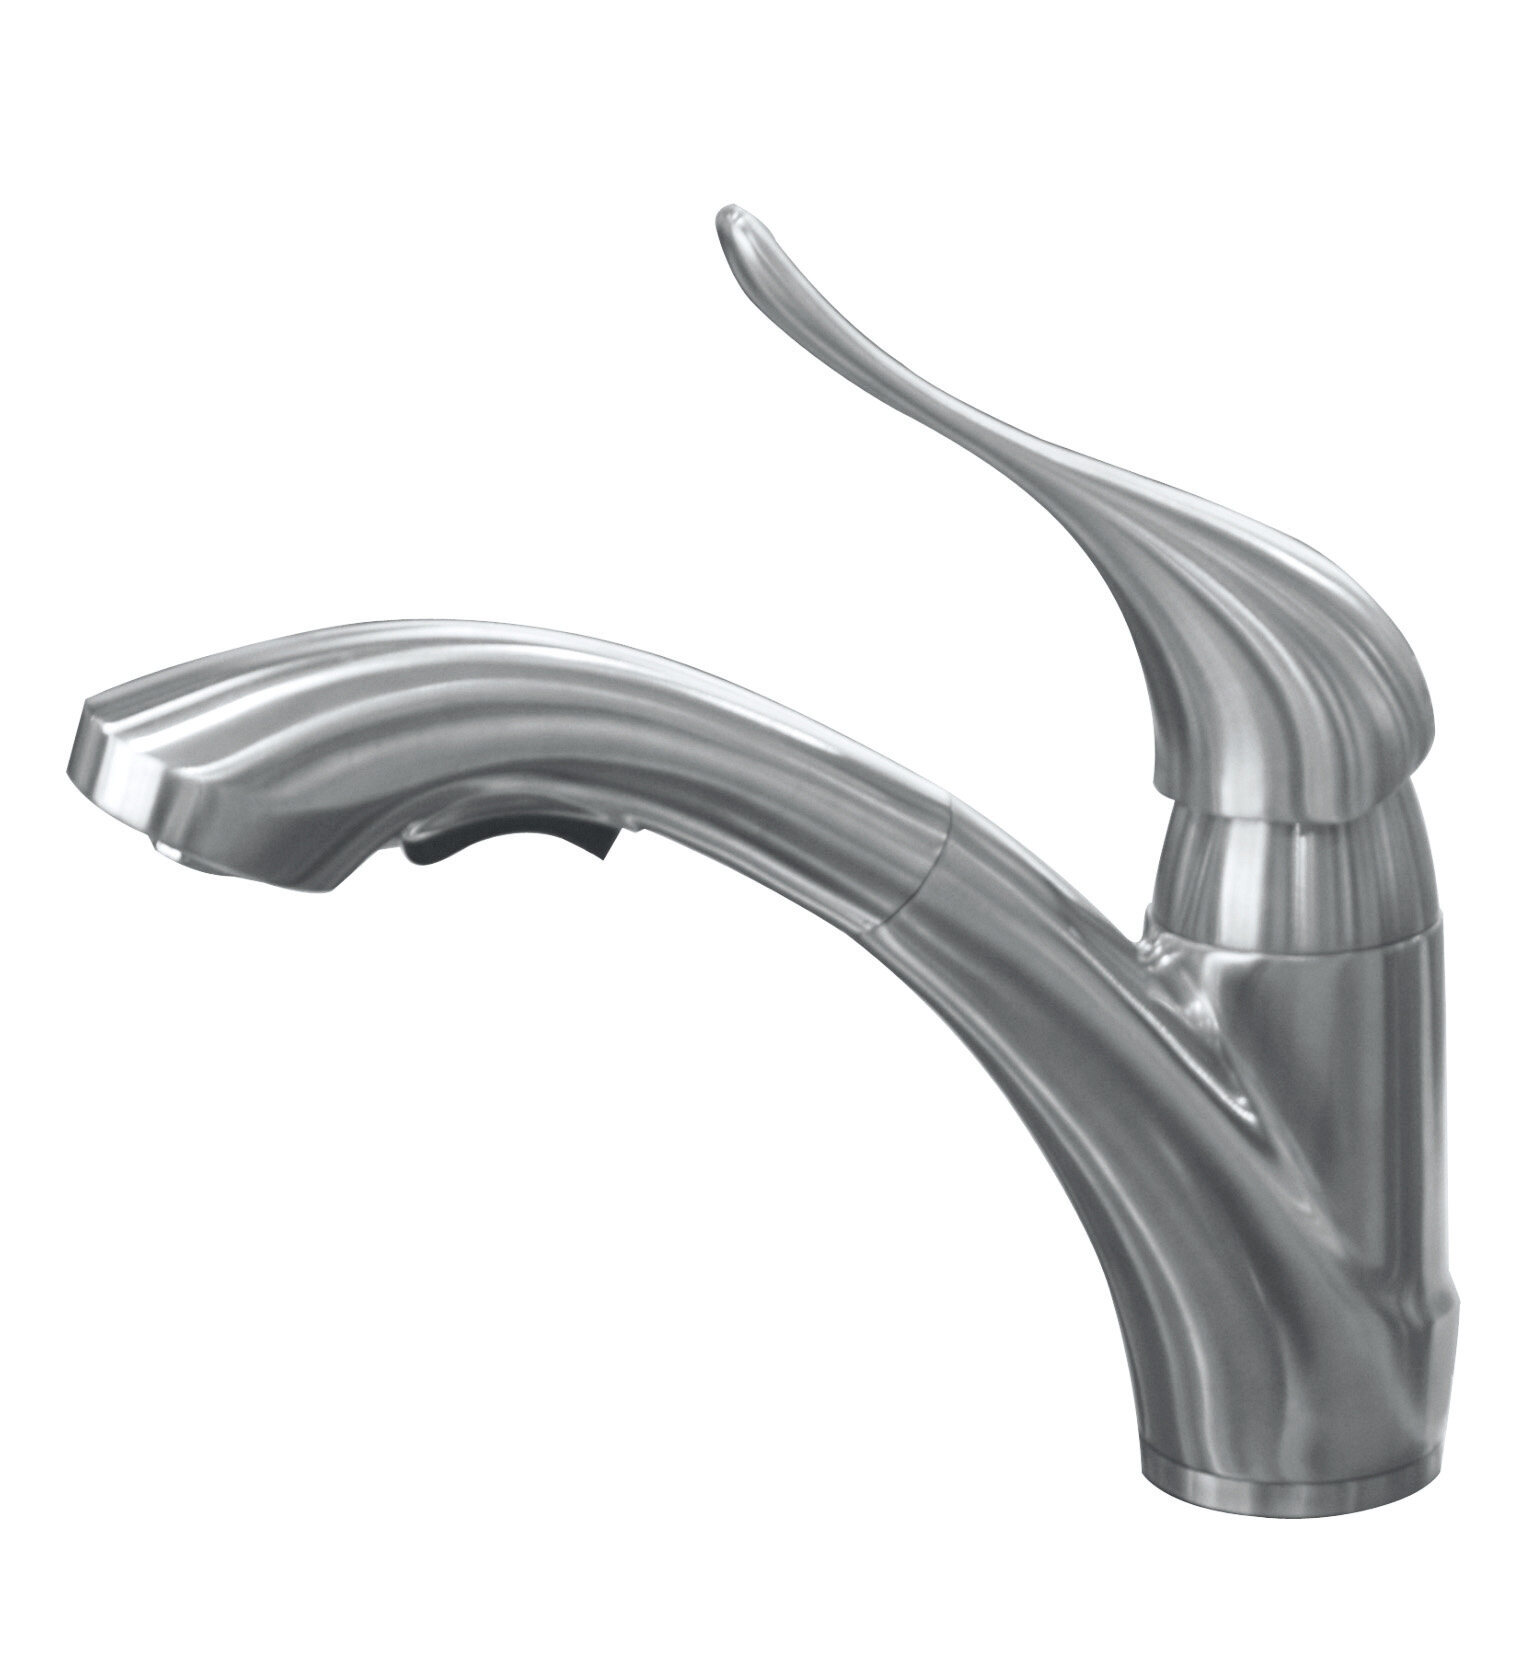 The Superior Choice for Durability: 316 Stainless Steel Faucet